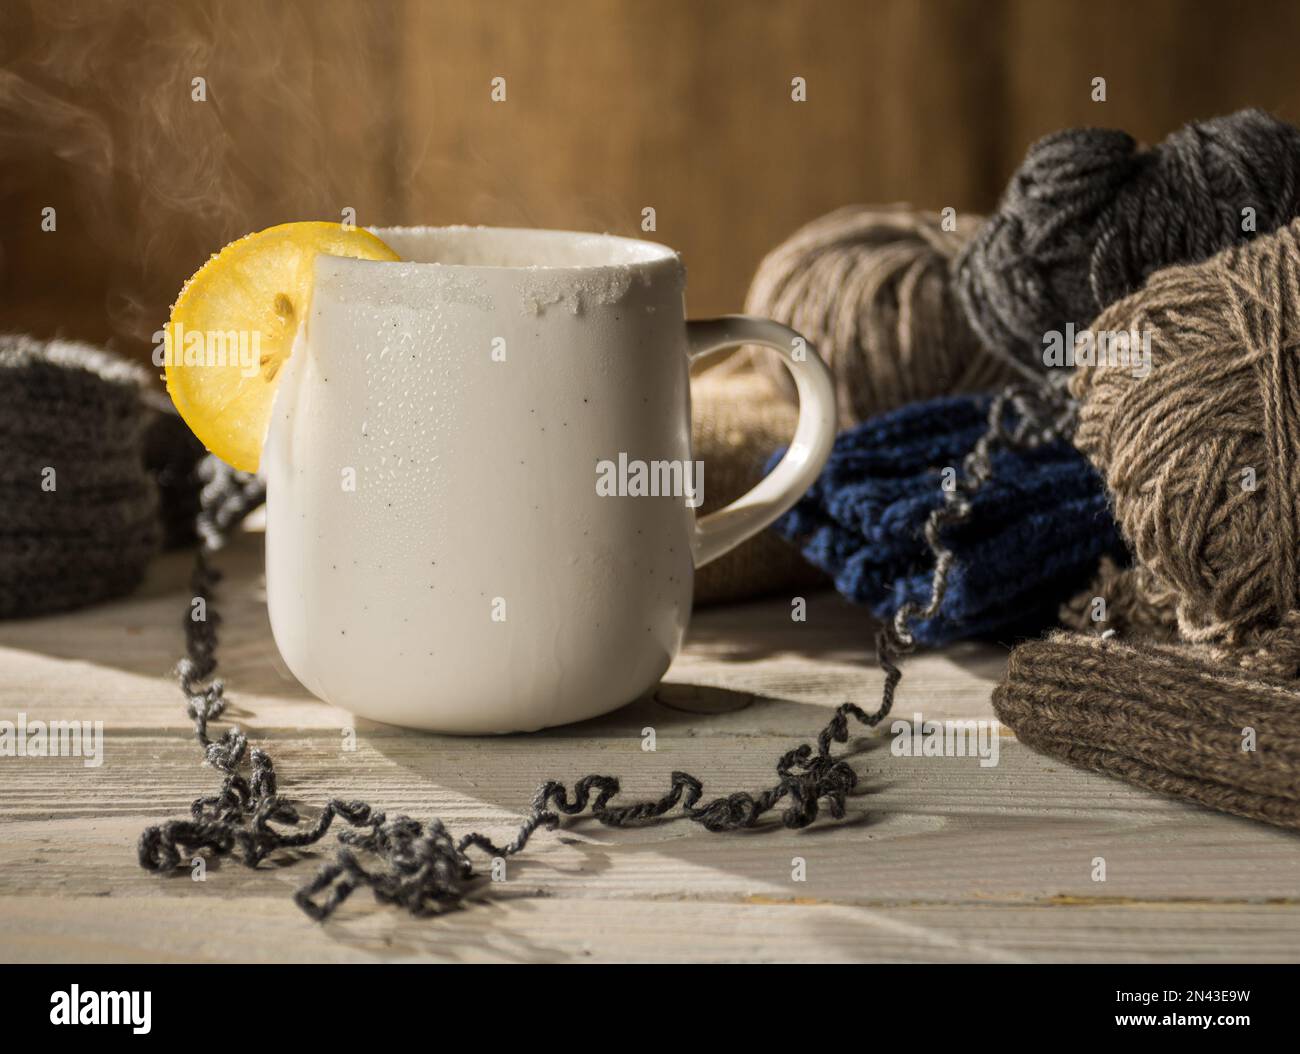 Cozy home scene - a mug of hot tea with lemon and steam on a wooden table surrounded by balls of woolen threads. Stock Photo